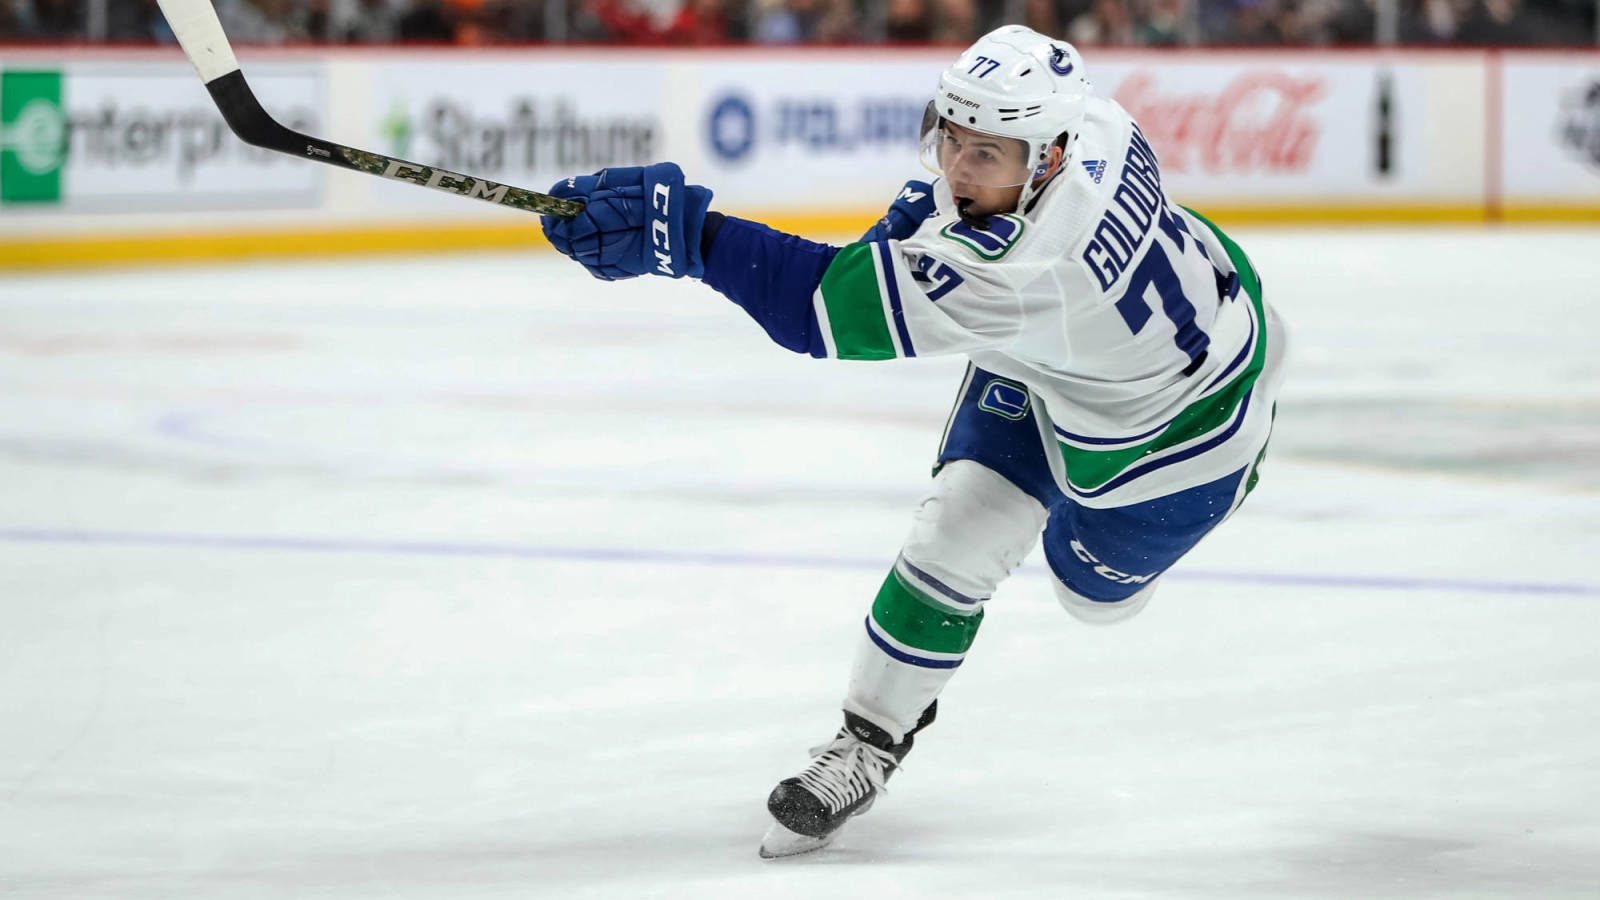 underrated nhl players 2015